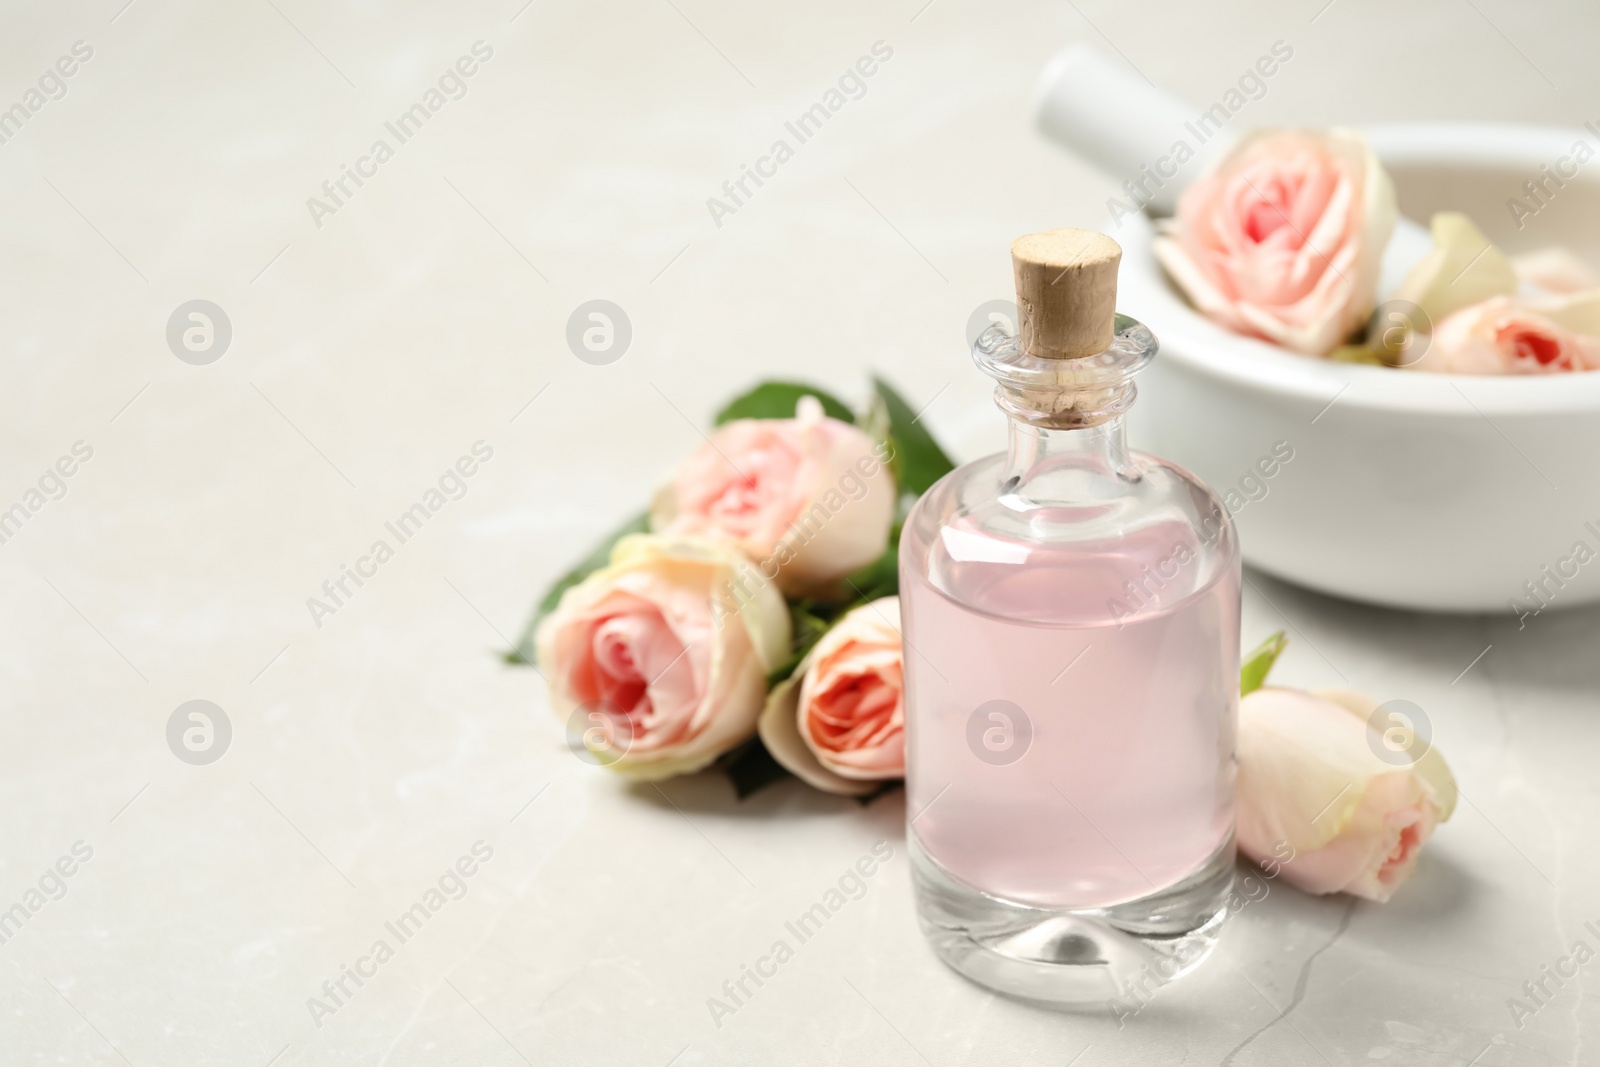 Photo of Bottle of rose essential oil and flowers on white table, space for text